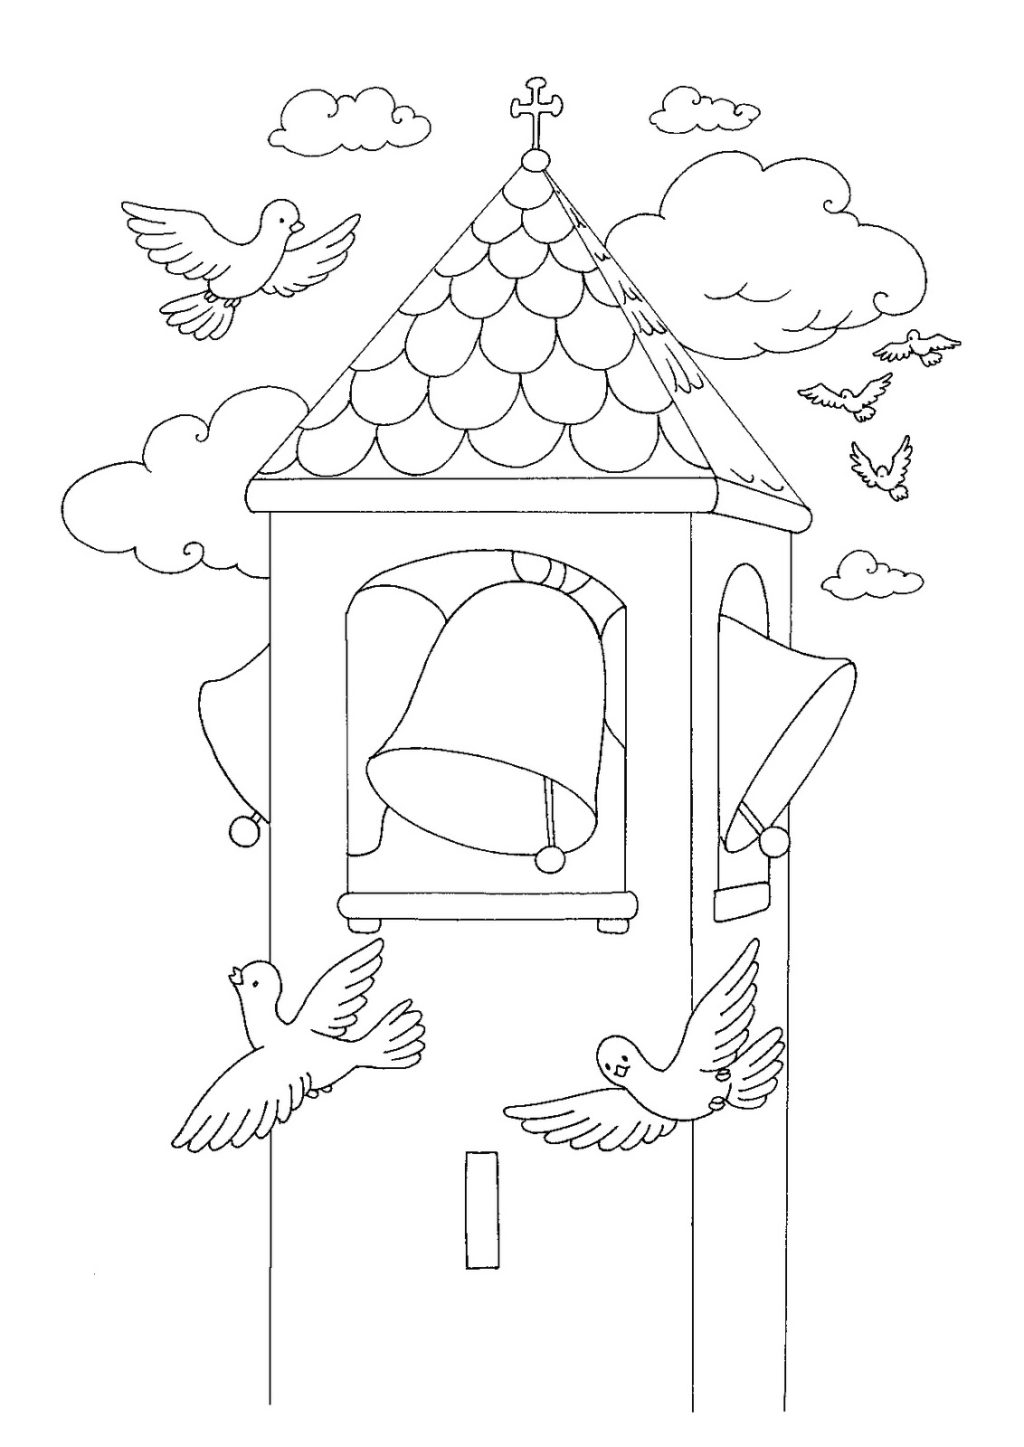 worksheet ~ Drawing Church Colouring Doll Pictures Religious Coloring Pages  Kids Images Christian Disney Children Going 63 Church Colouring Picture  Inspirations. Religious Coloring Pages. We Are The Church Coloring Page.  Printable Church